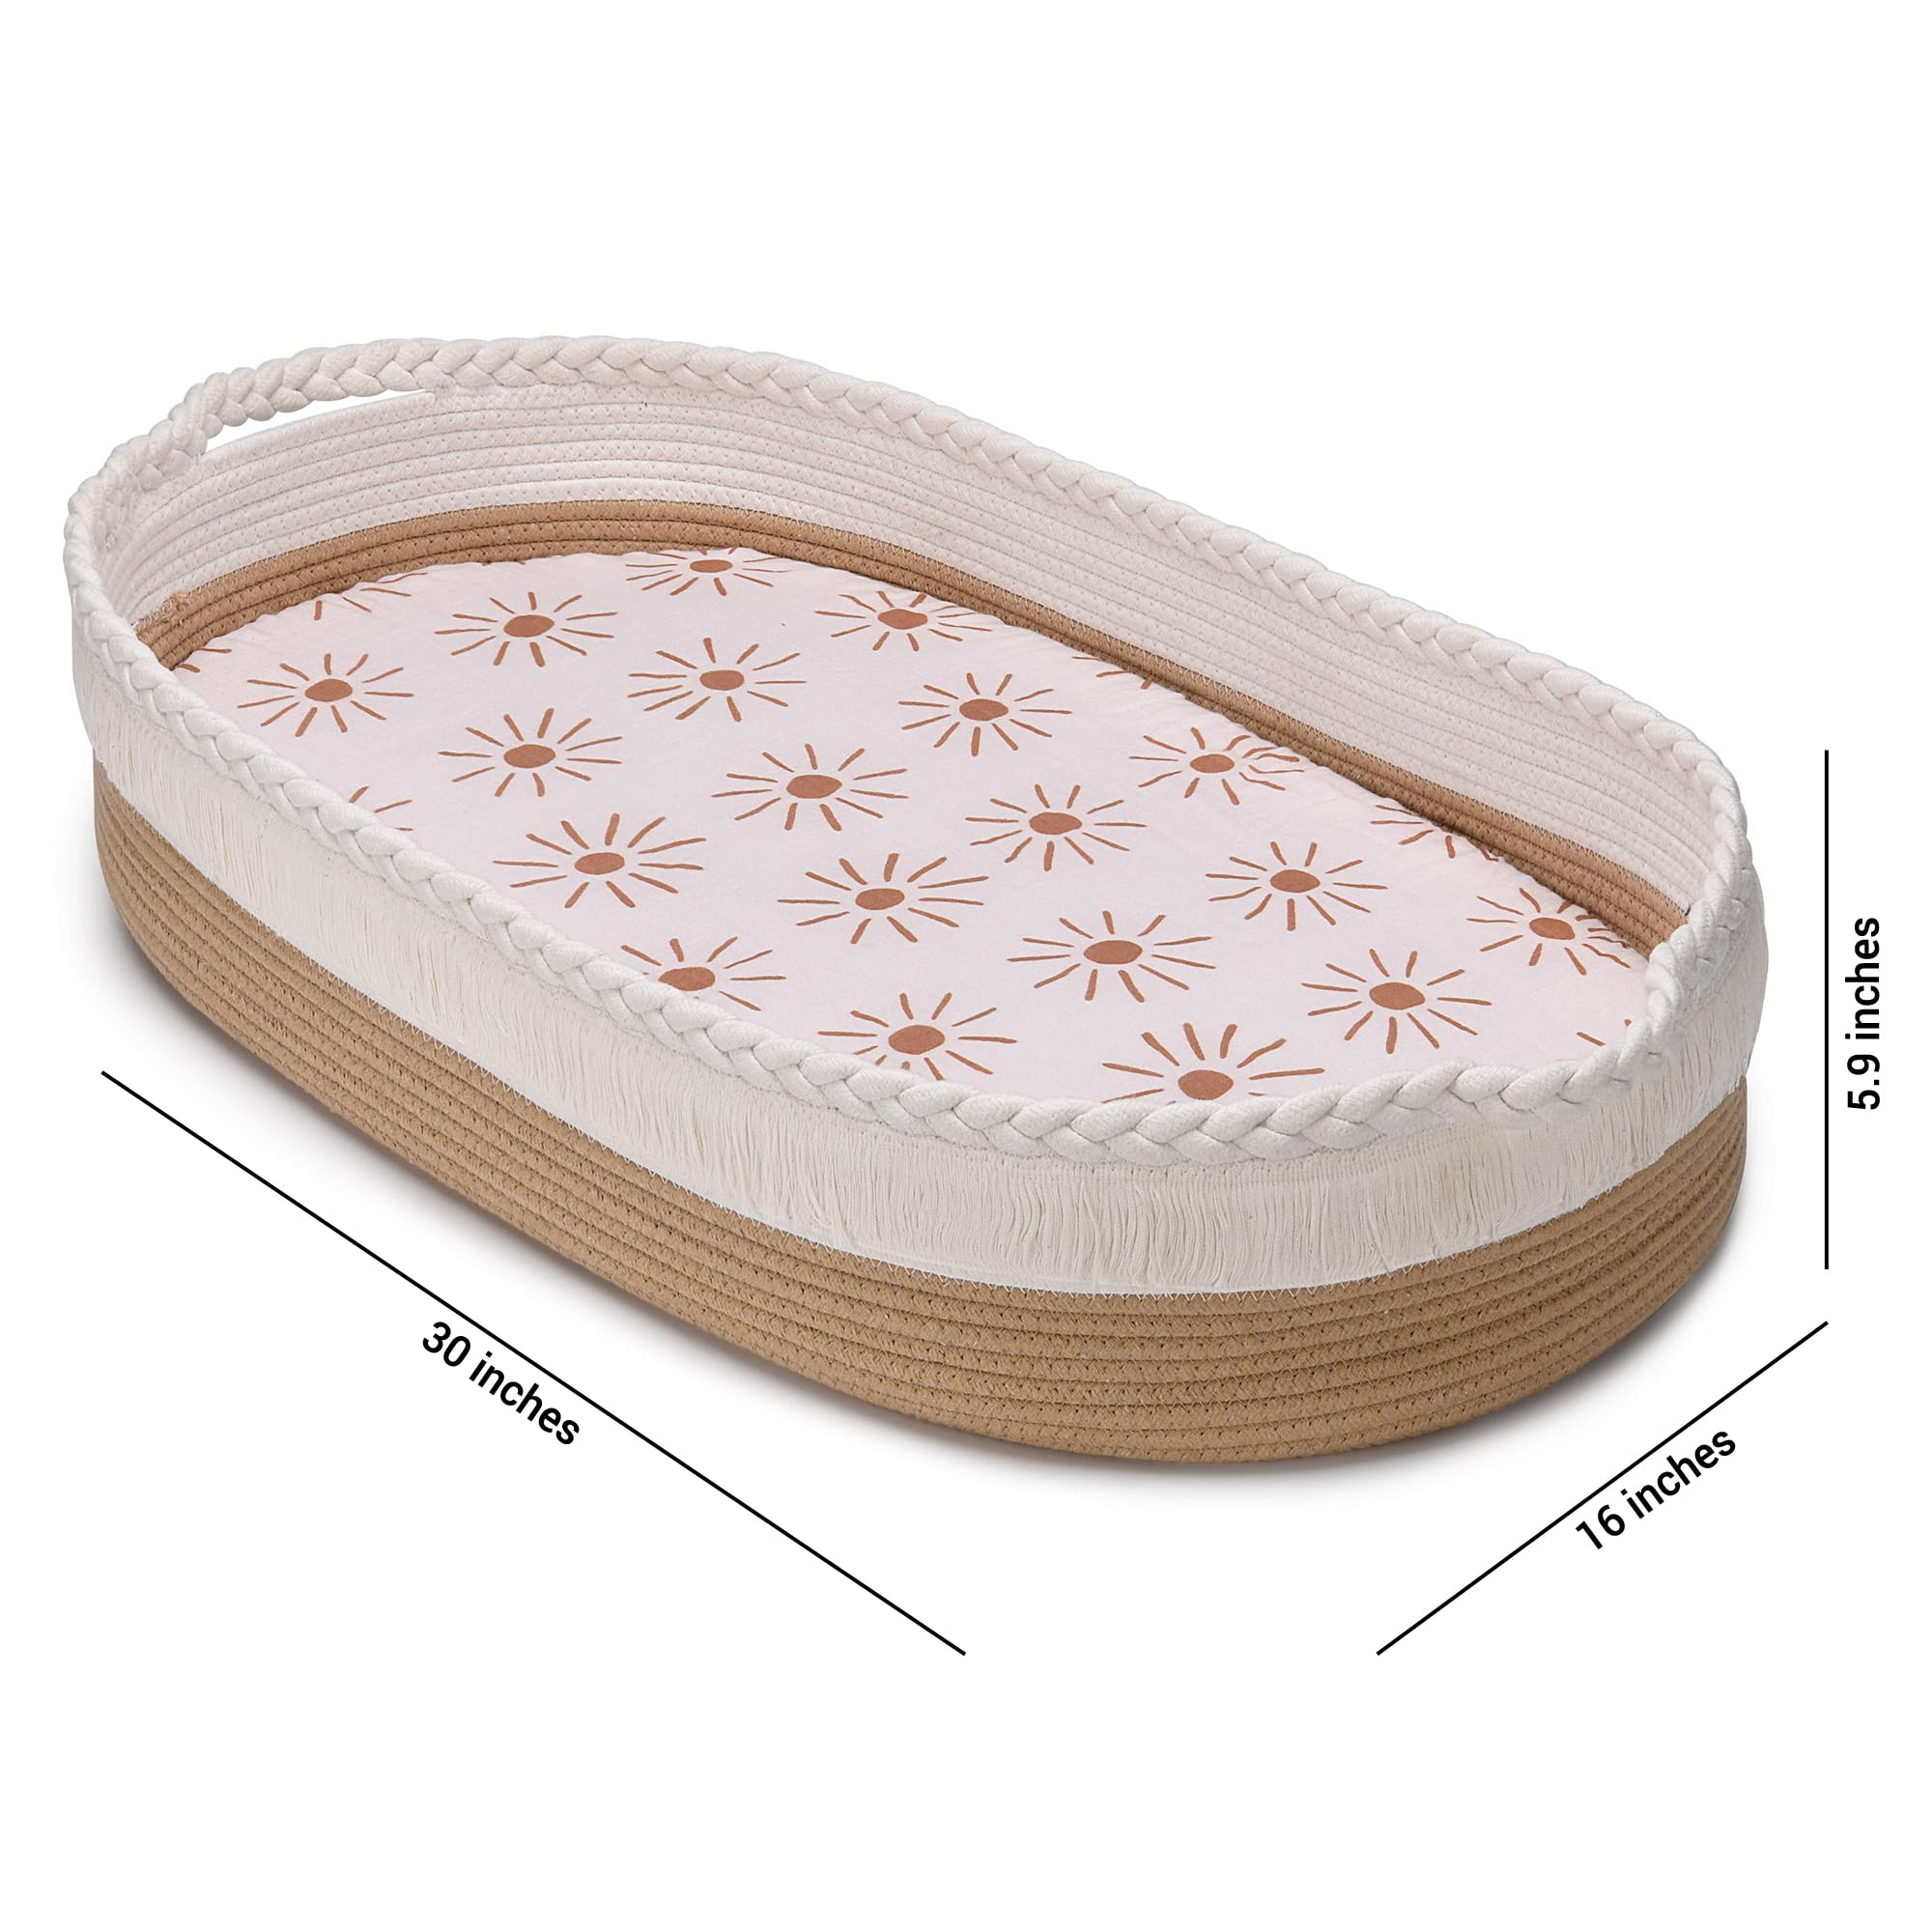 Baby Changing Basket - Handmade Cotton Rope Basket - Moses Table Topper – Includes Thick Foam Pad, Removable Waterproof Mattress Cover and Gender-Neutral Muslin Sheet - Diaper Changing Station